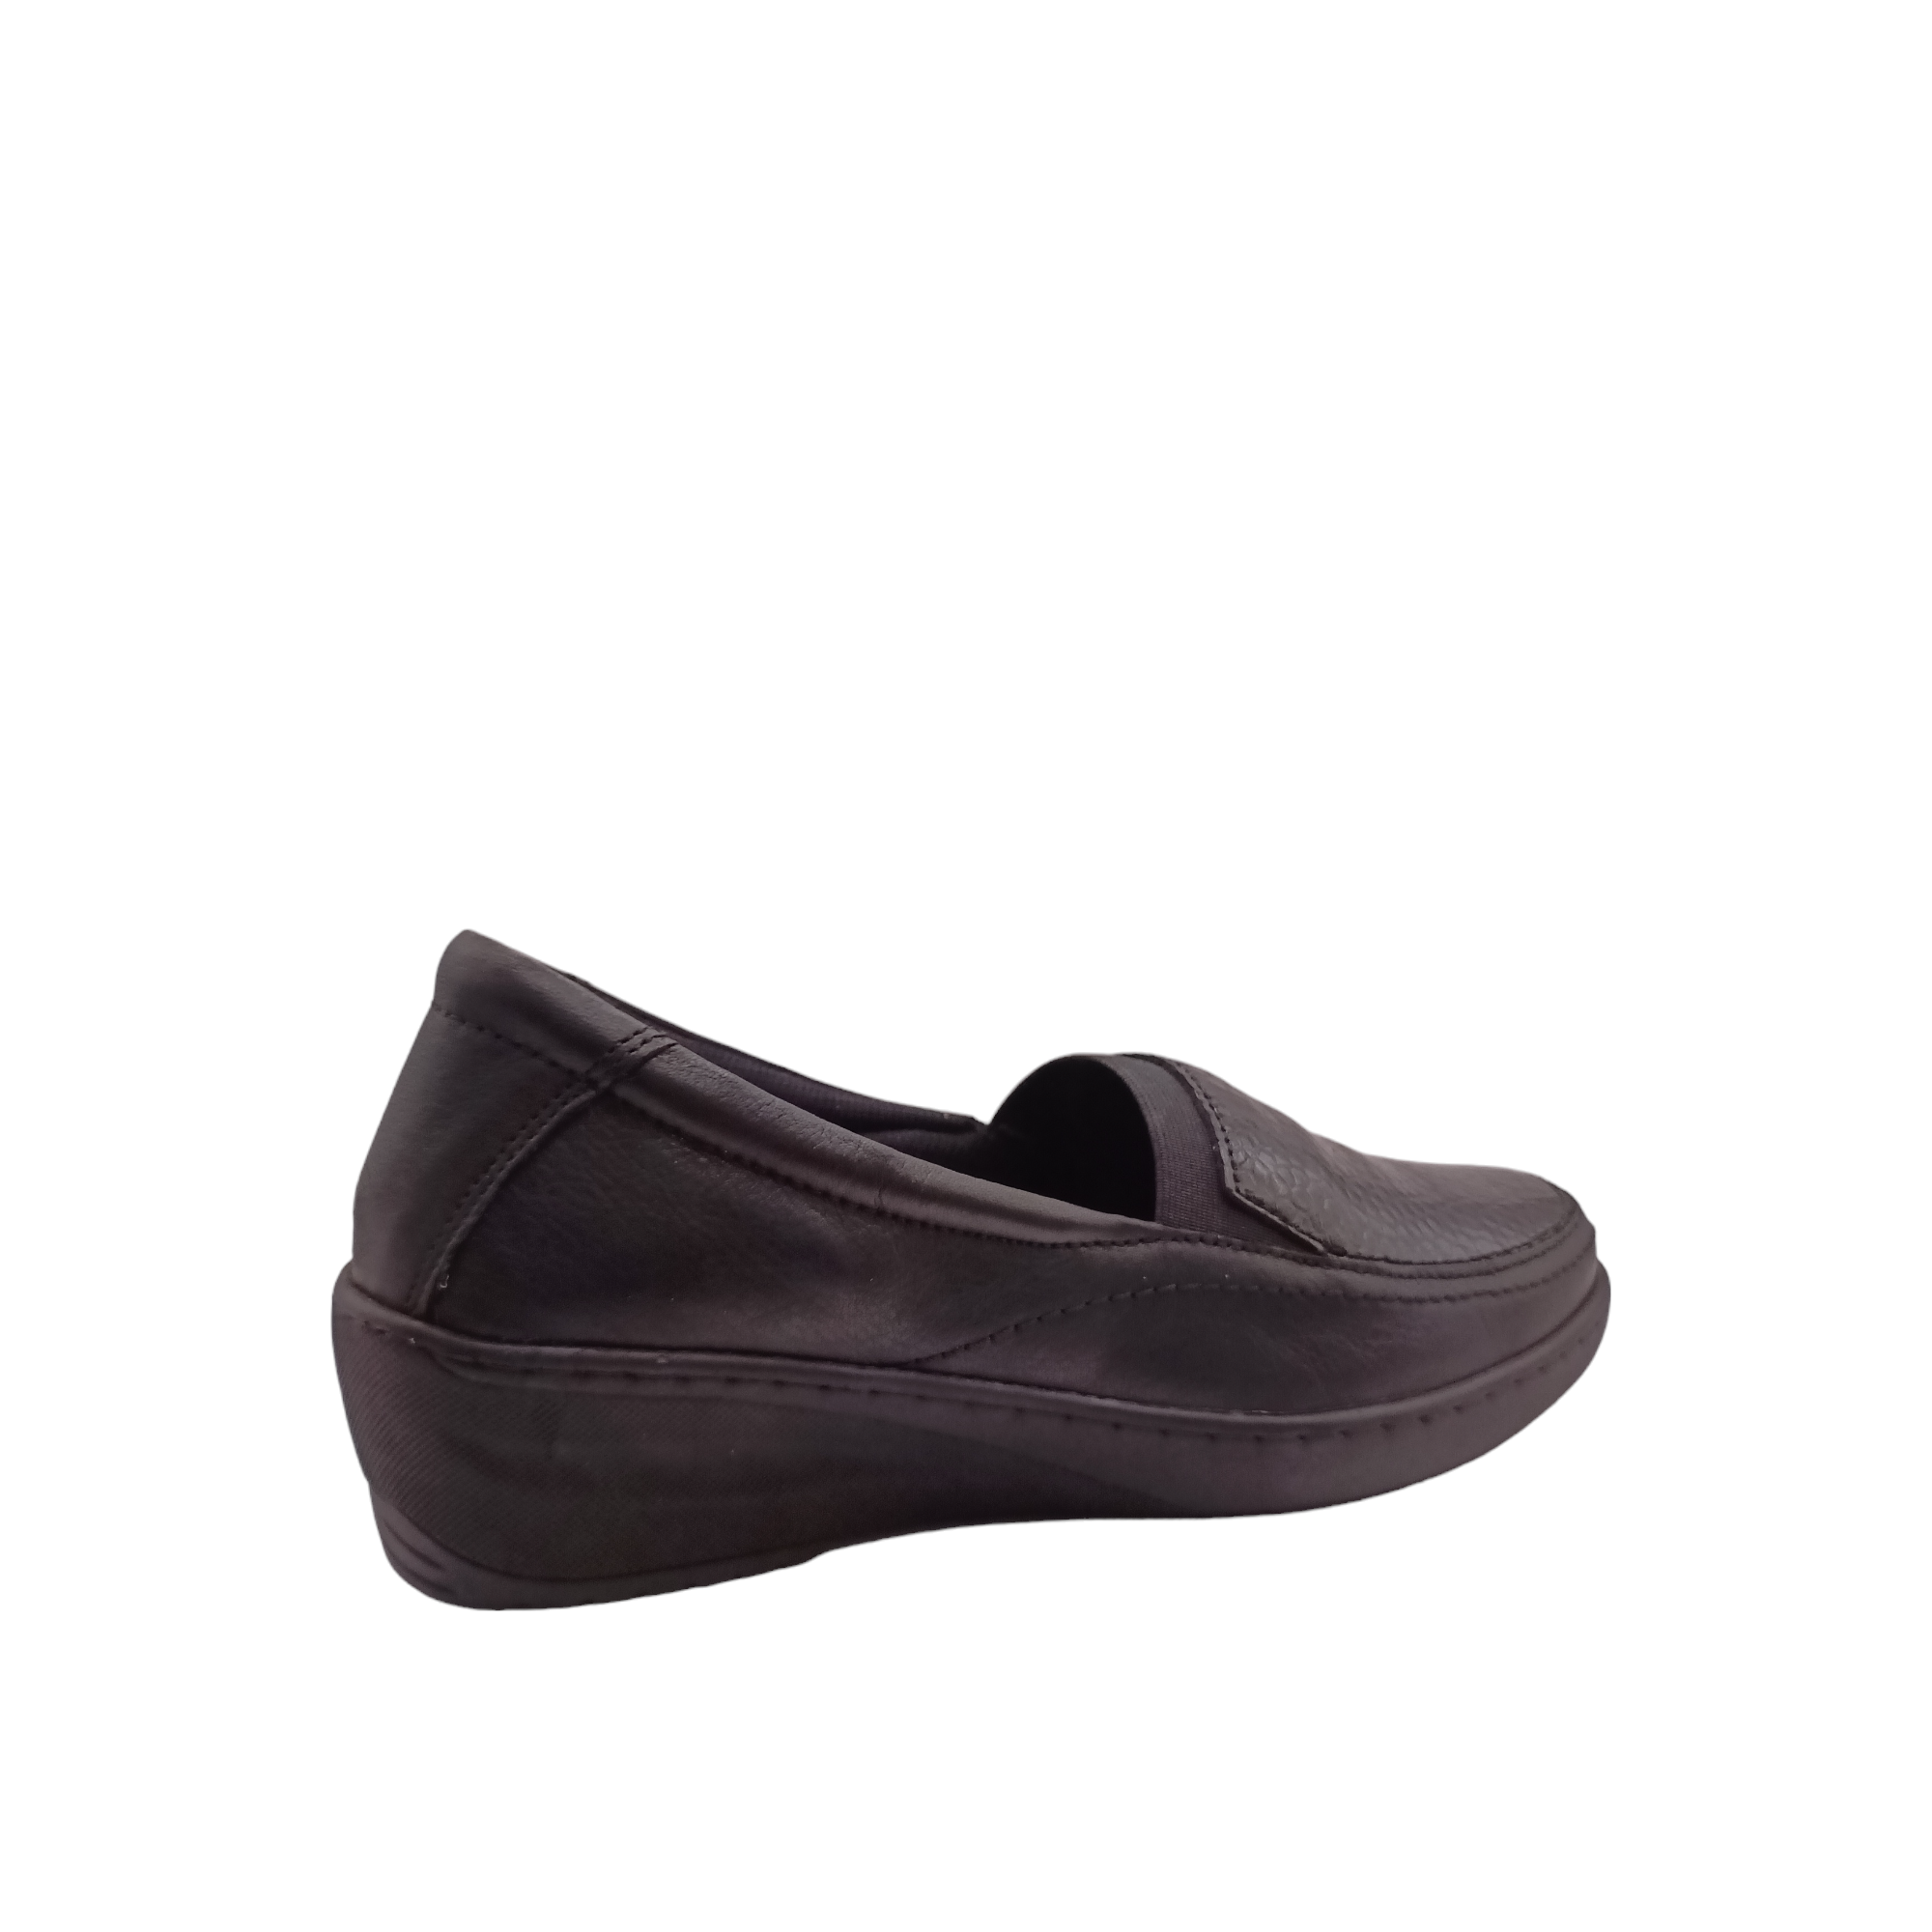 Shop CP149-18 Cabello - with shoe&amp;me - from Cabello - Shoes - Shoe, Winter, Womens - [collection]